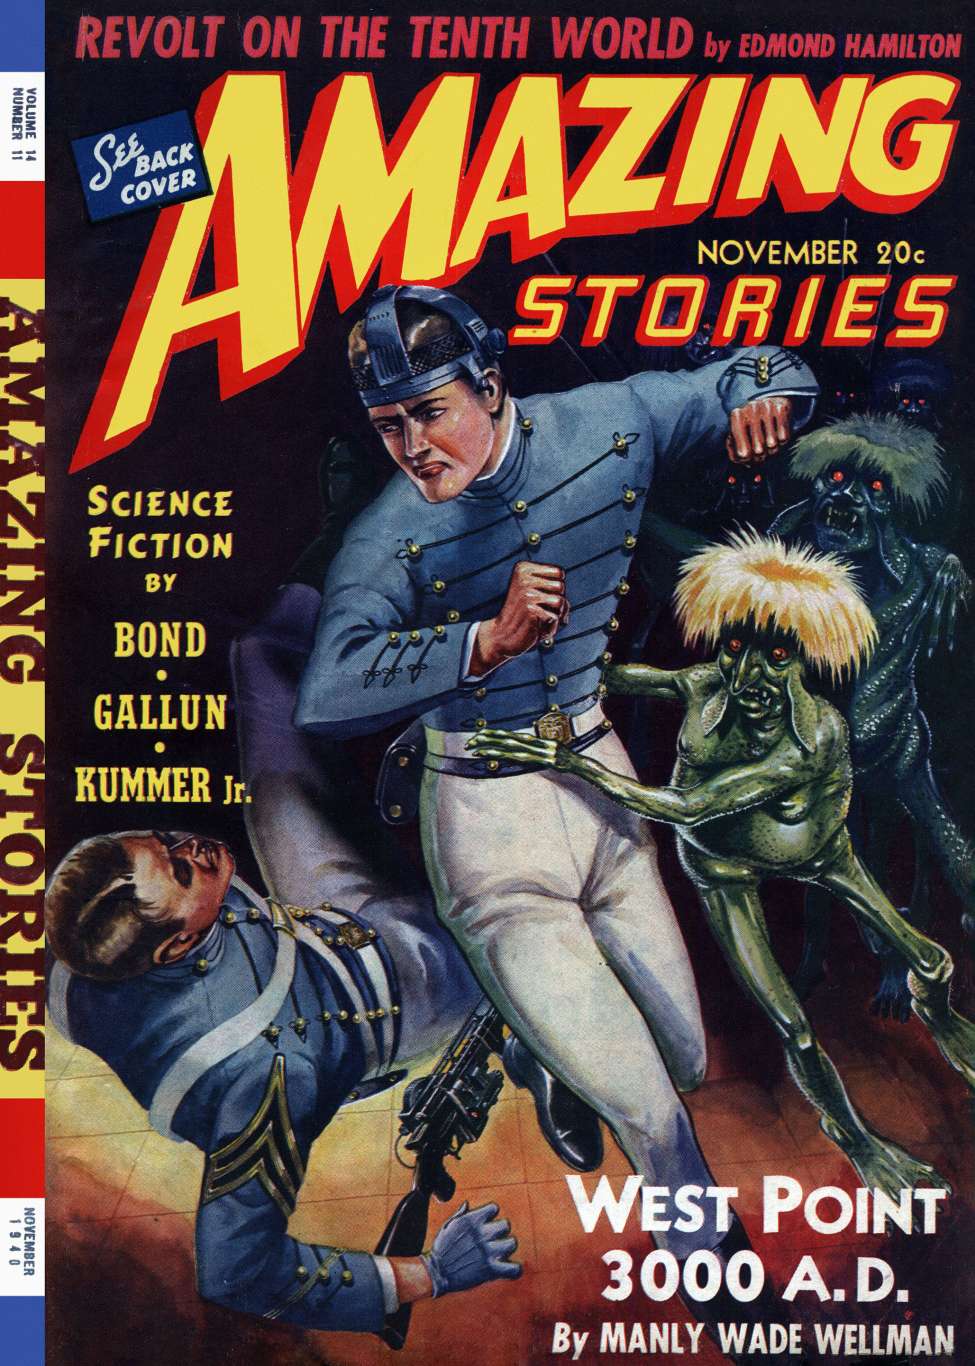 Comic Book Cover For Amazing Stories v14 11 - West Point, 3000 A.D. - Manly Wade Wellman